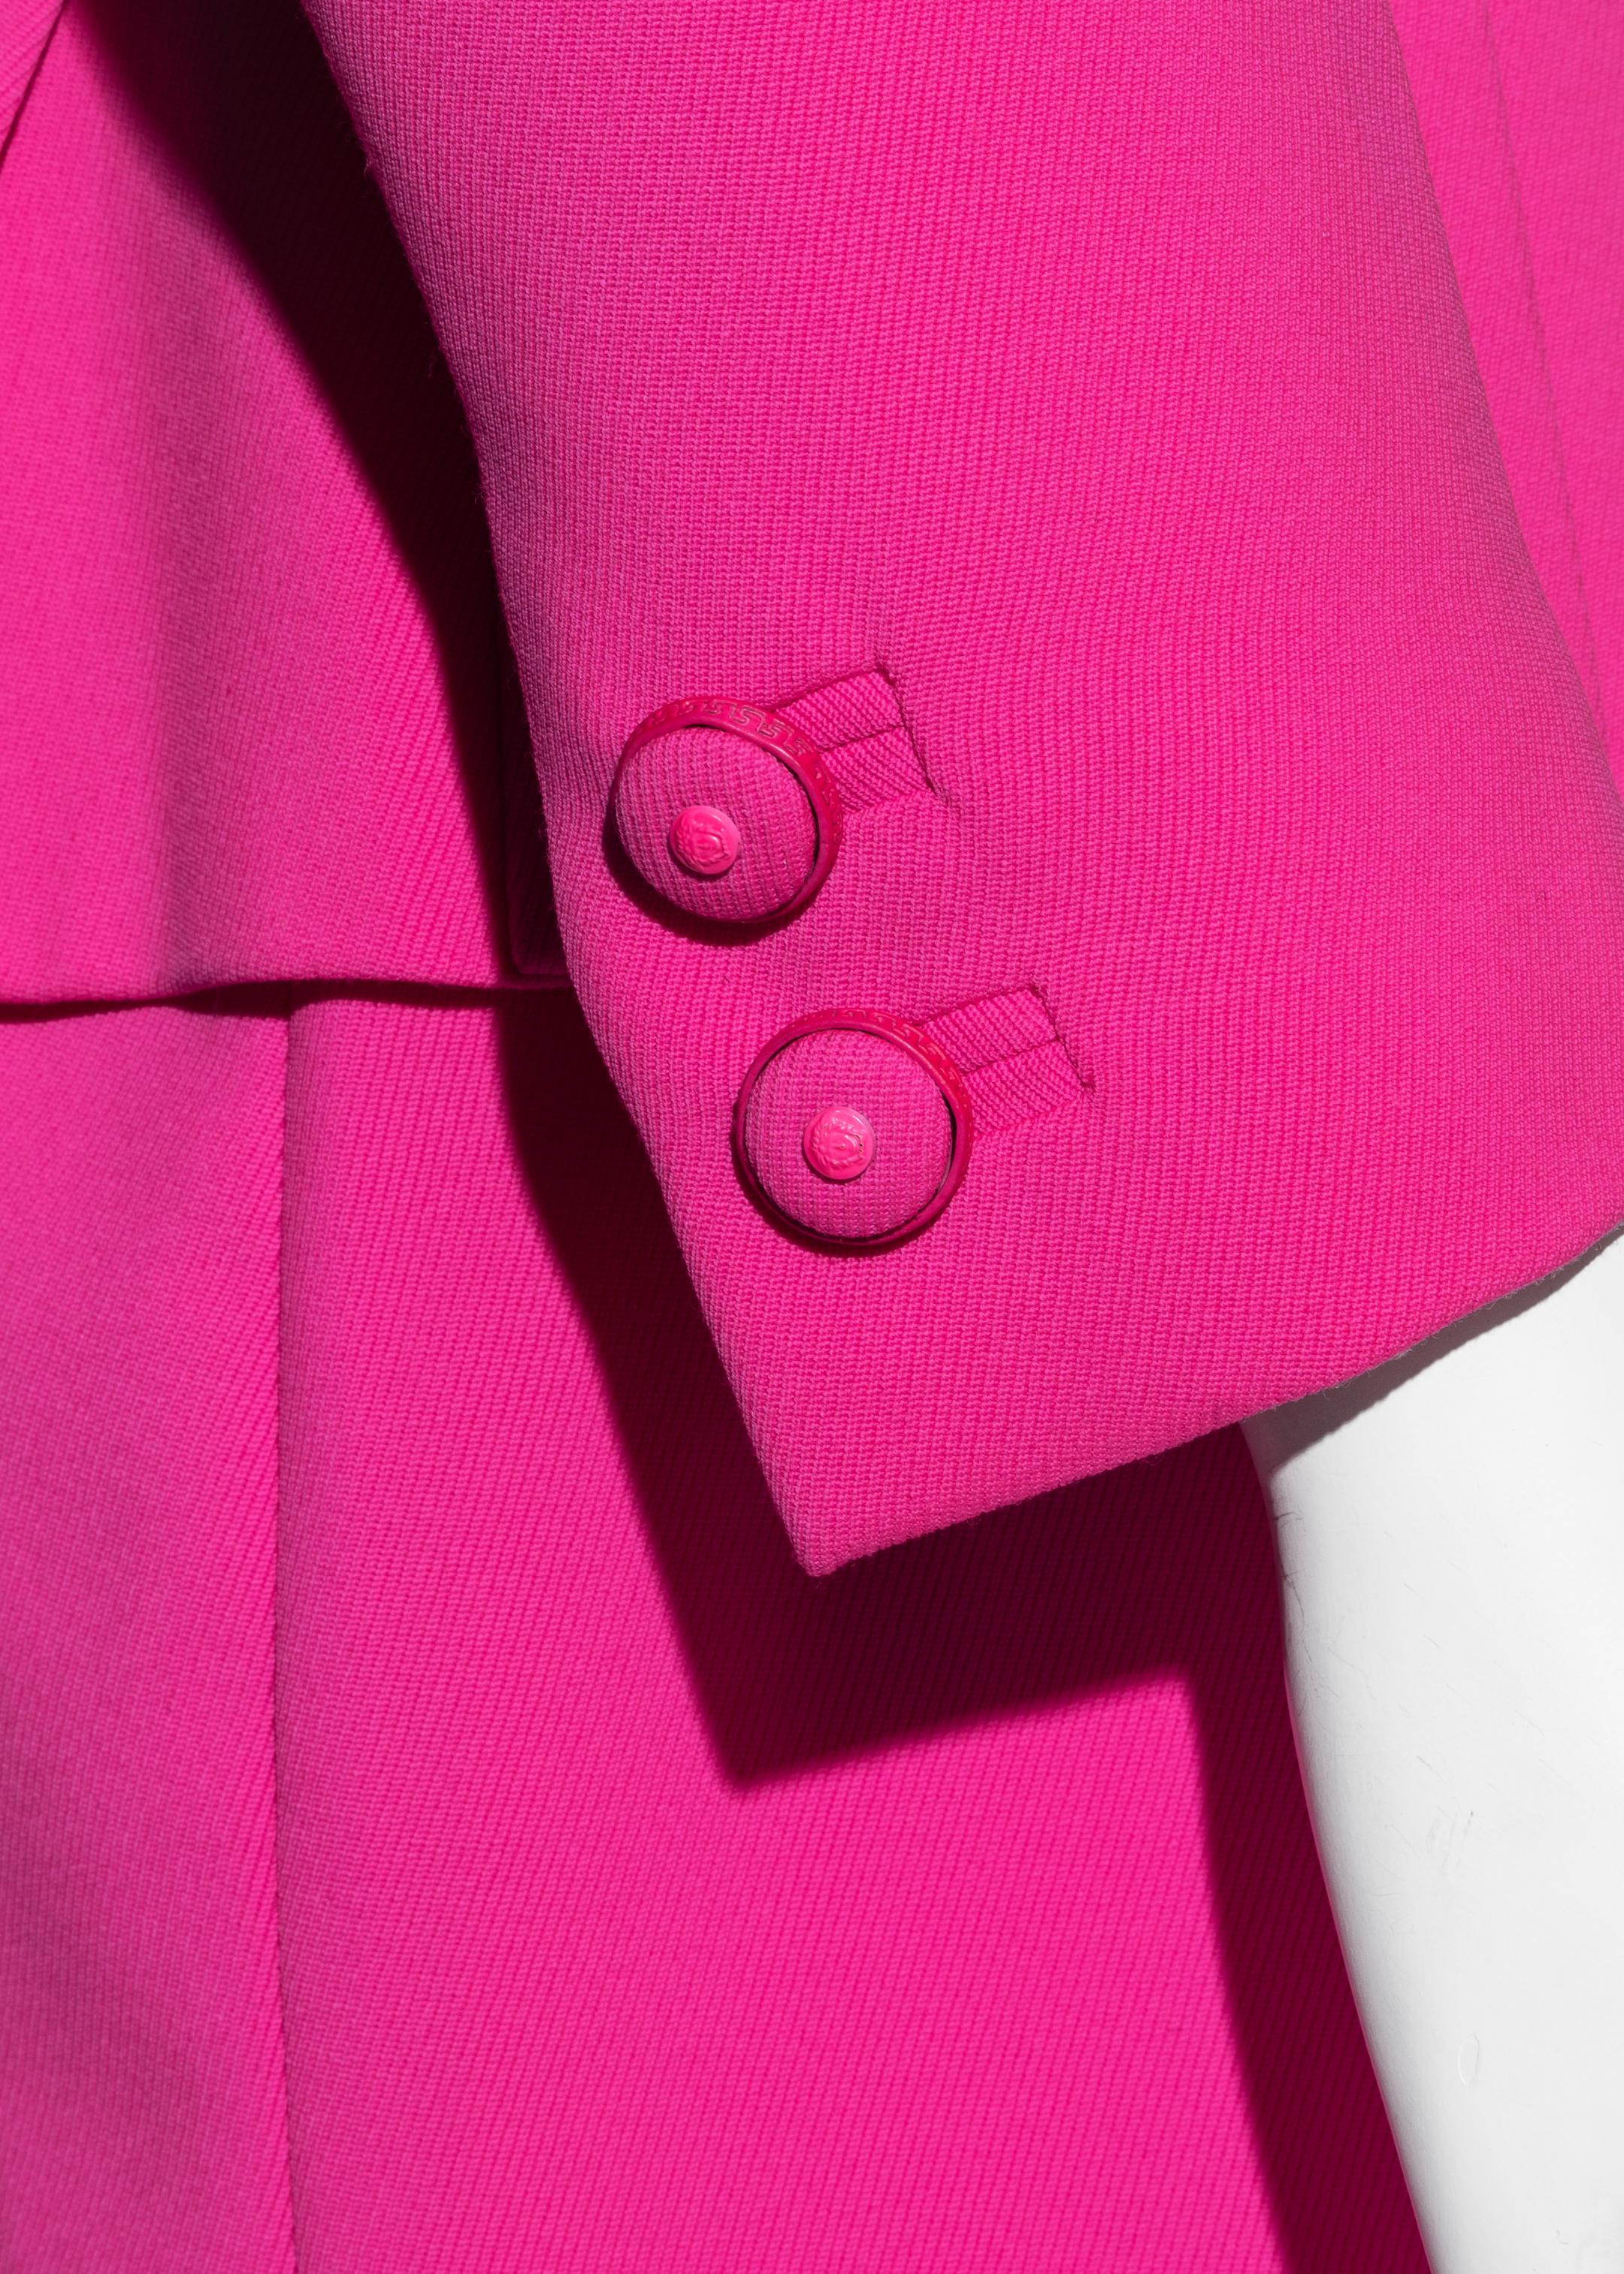 Gianni Versace neon pink wool monochromatic mini skirt suit, fw 1996 In Excellent Condition For Sale In London, GB